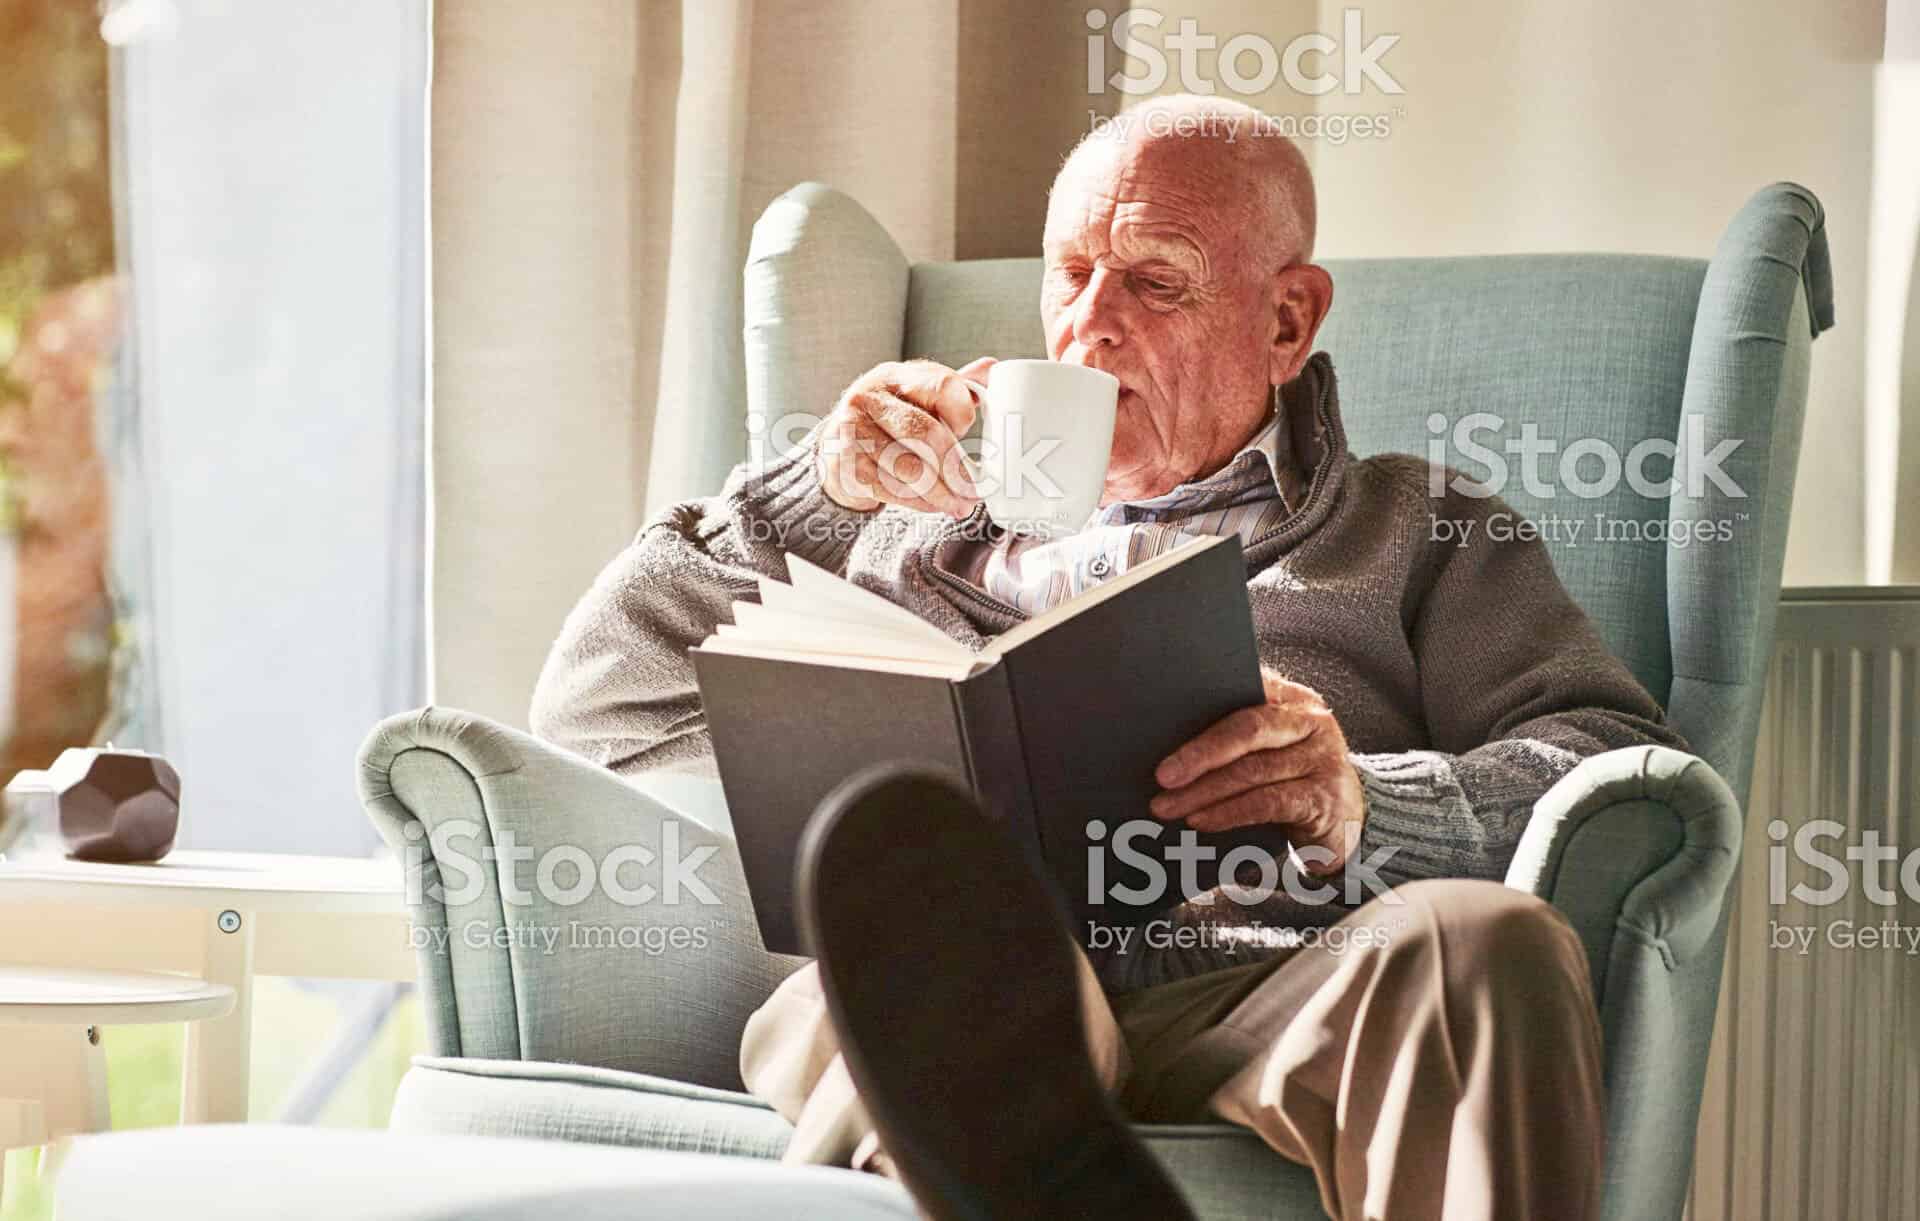 An elderly man sitting in a chair reading a book stock photo.